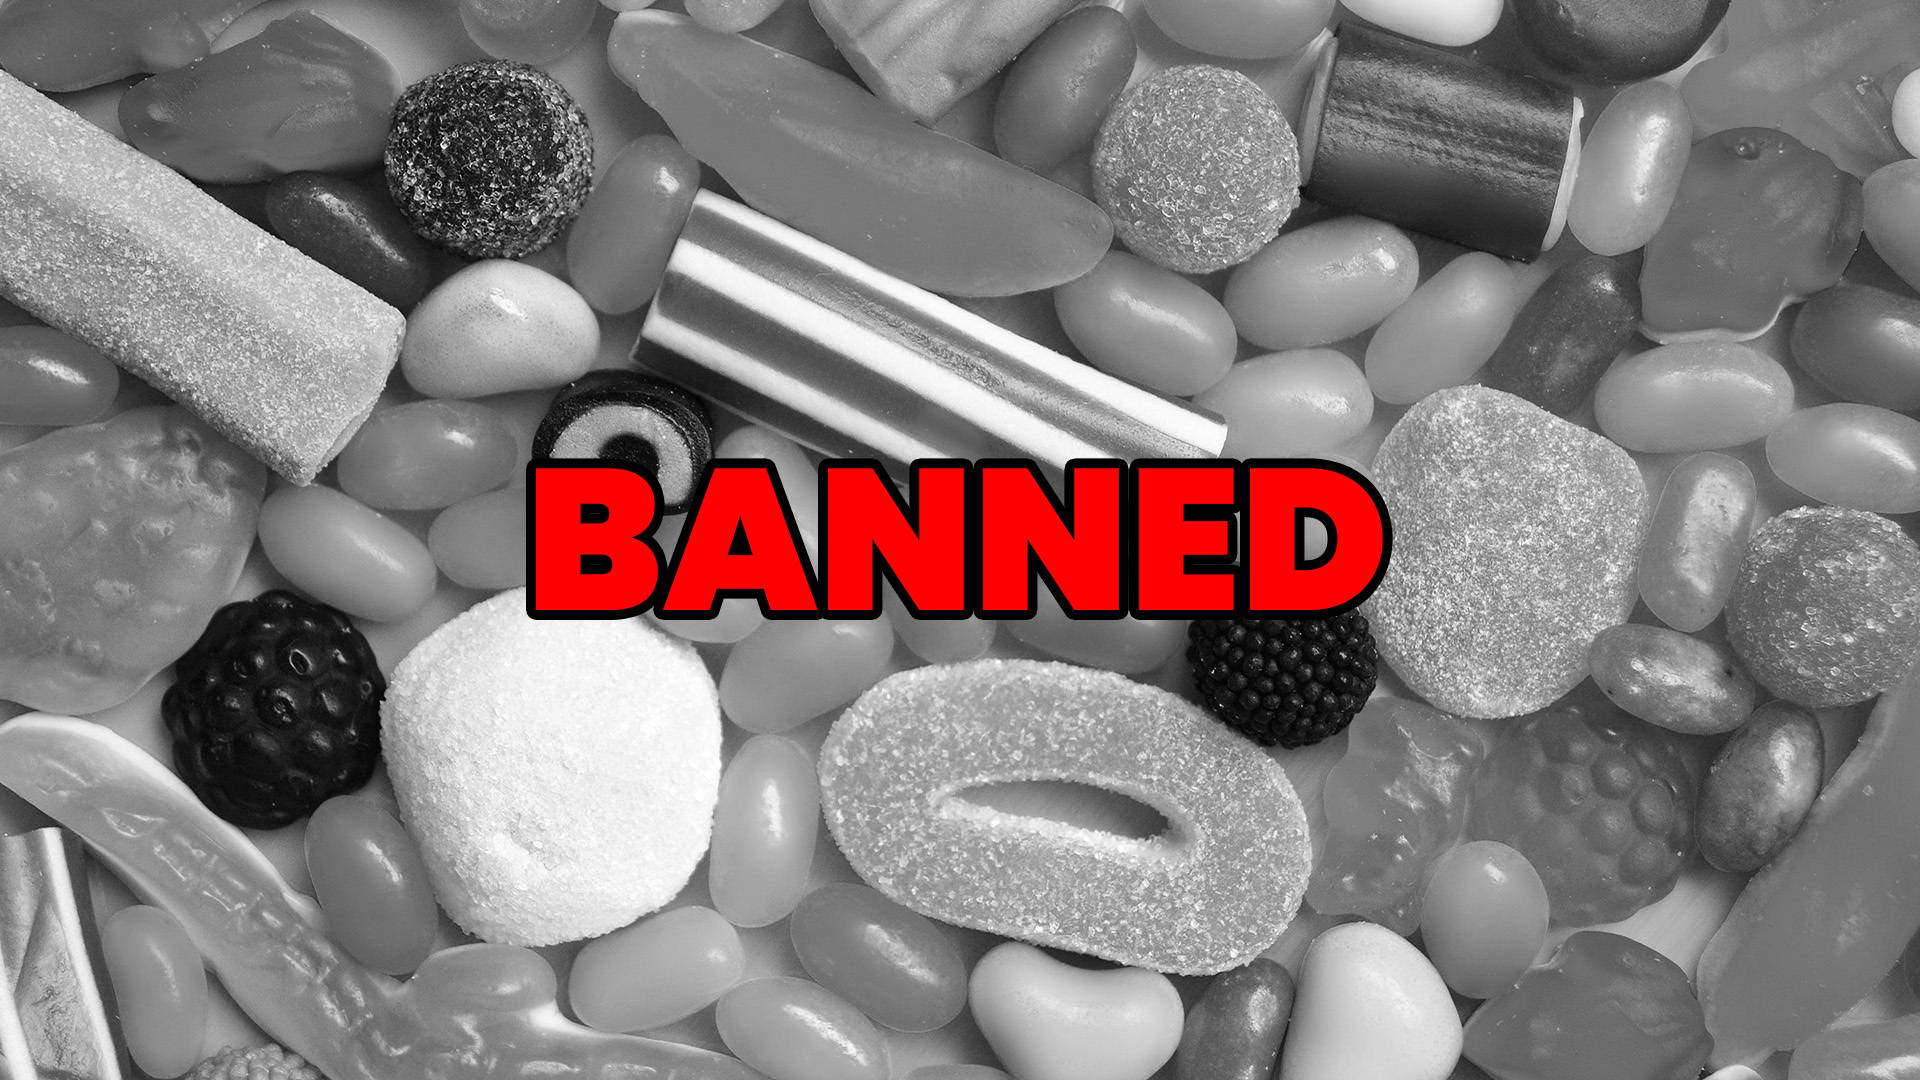 An image showing a ban on sweet flavoured vapes